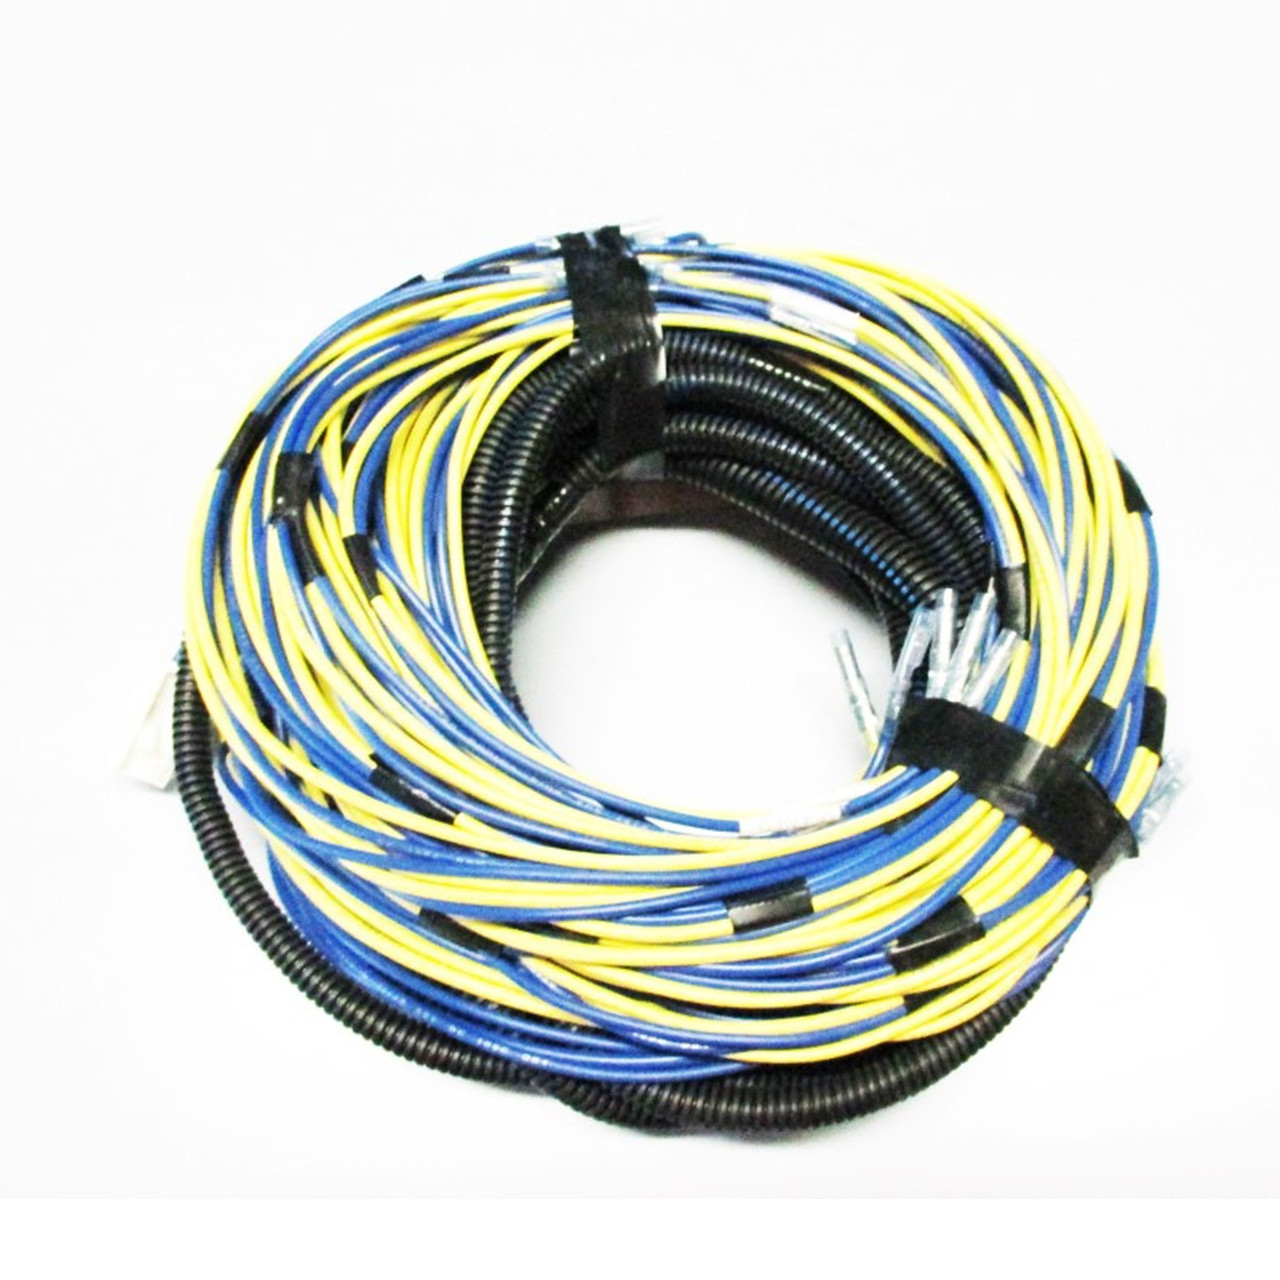 Larson Harness Courtesy Light Cup Holder/LED Wire Harness 2270-1438-HARNACC-00